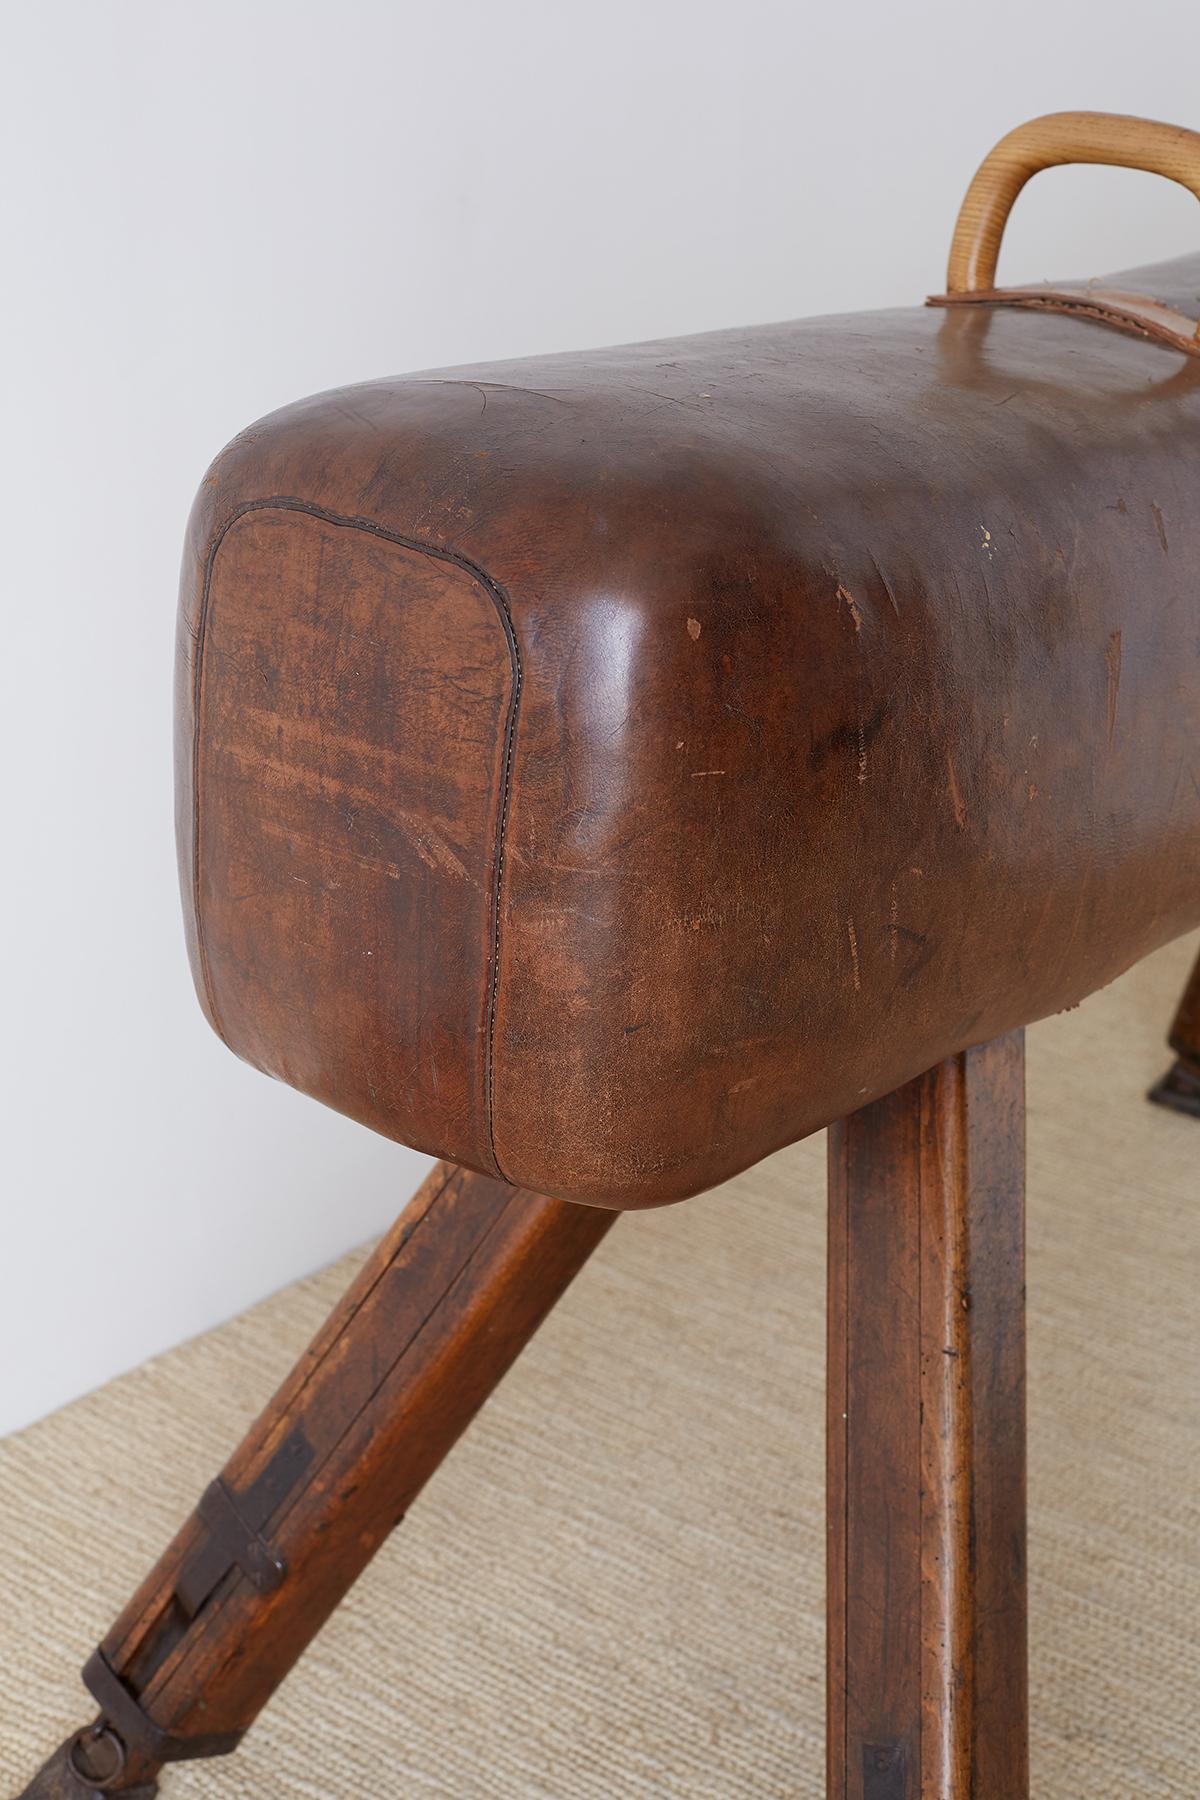 Hand-Crafted 19th Century English Leather Gymnastic Pommel Horse